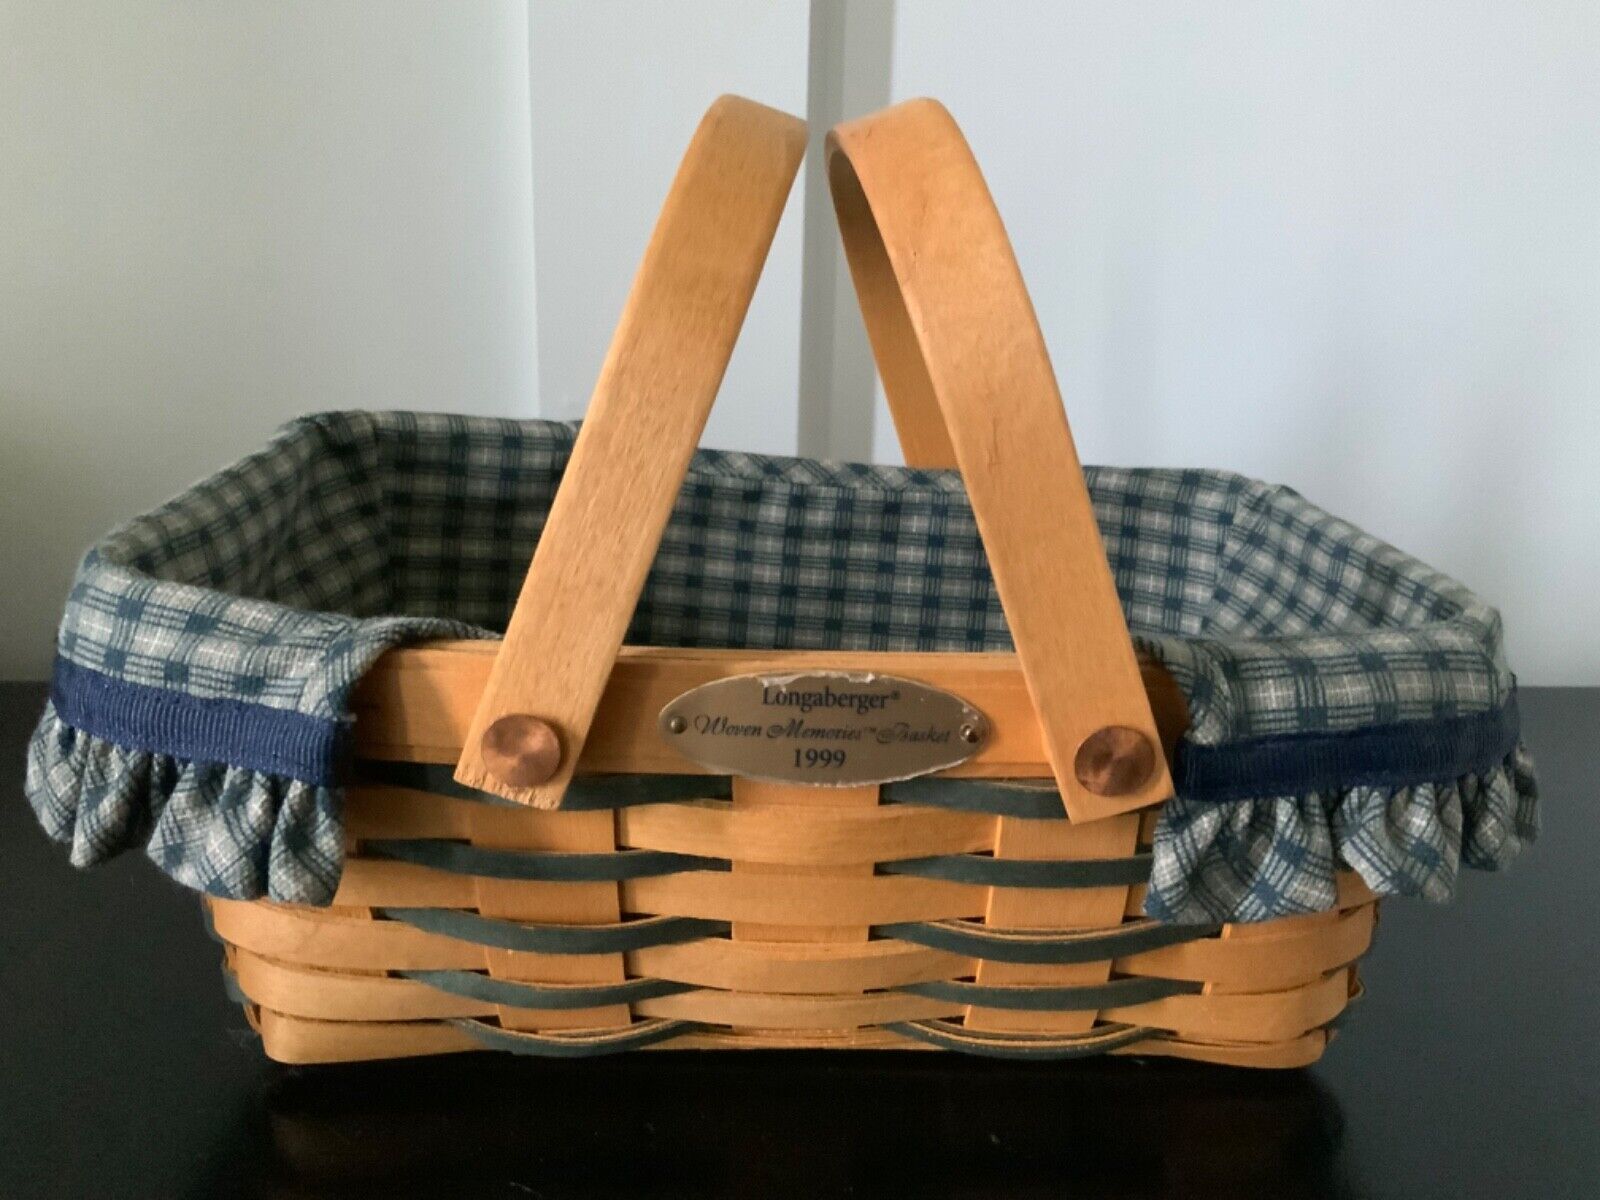 Longaberger 1999 Woven Memories Basket Two Handles With Blue Plaid Liner